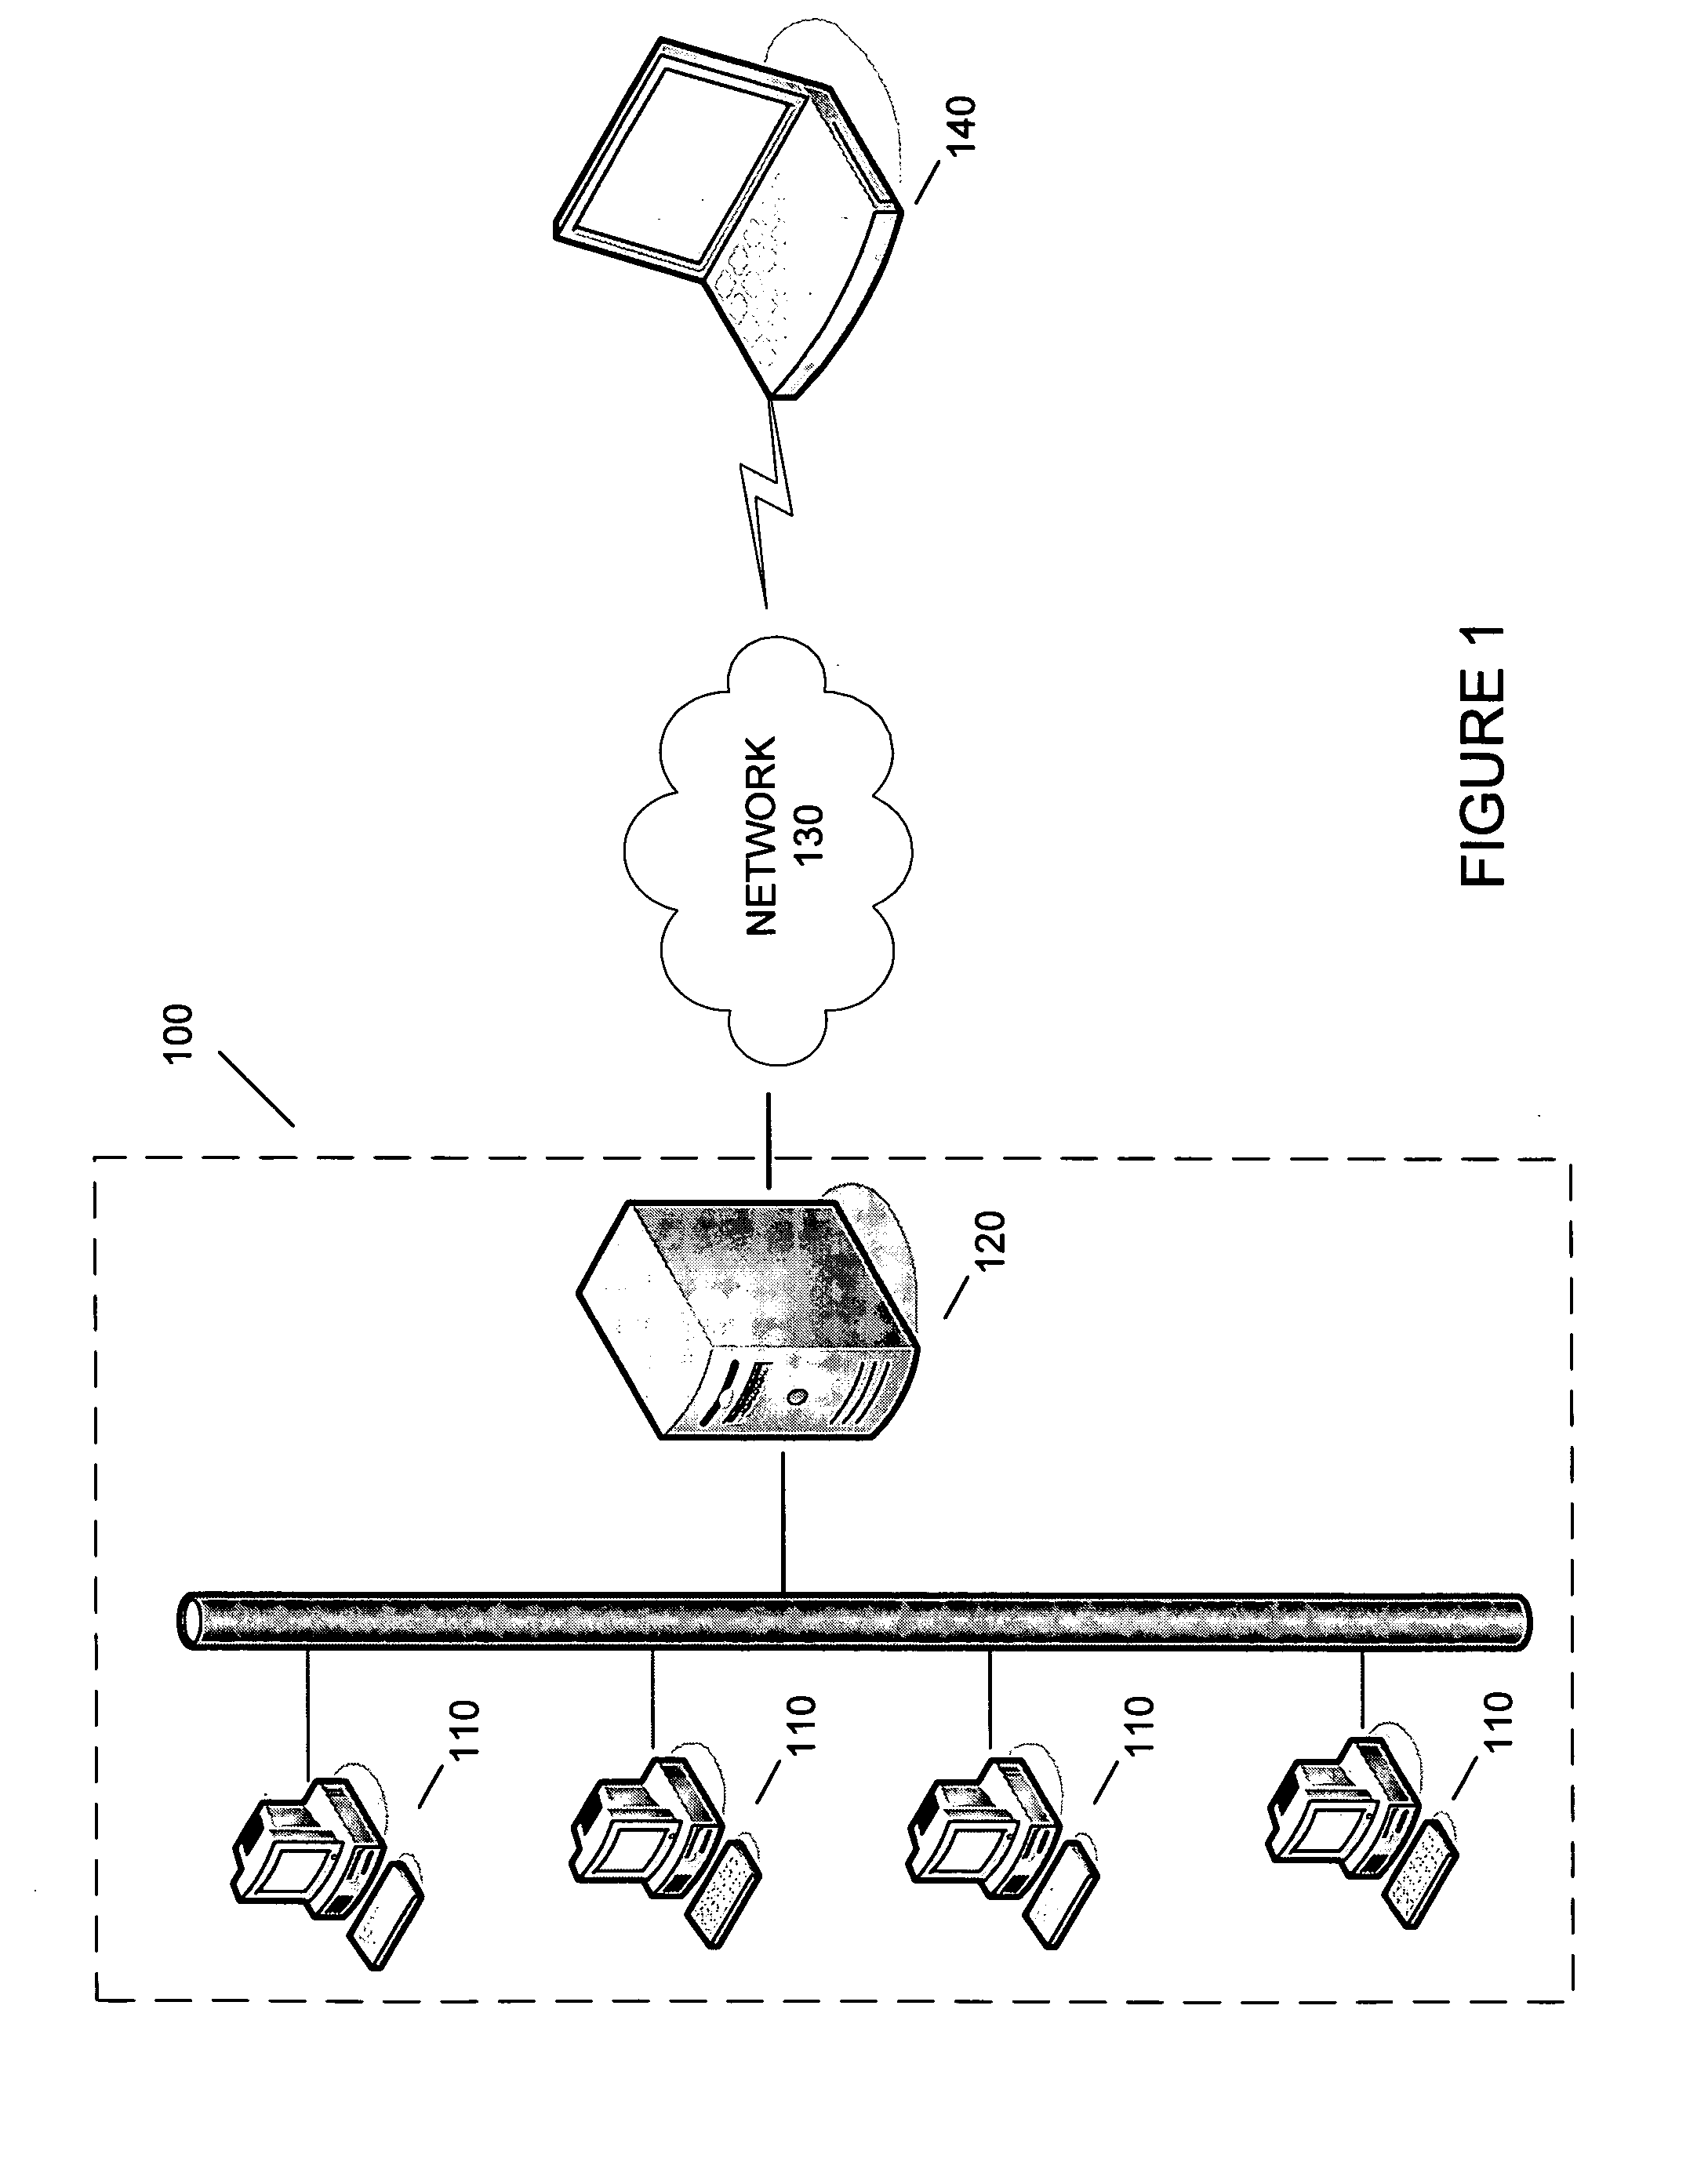 System and method for providing a secure connection between networked computers